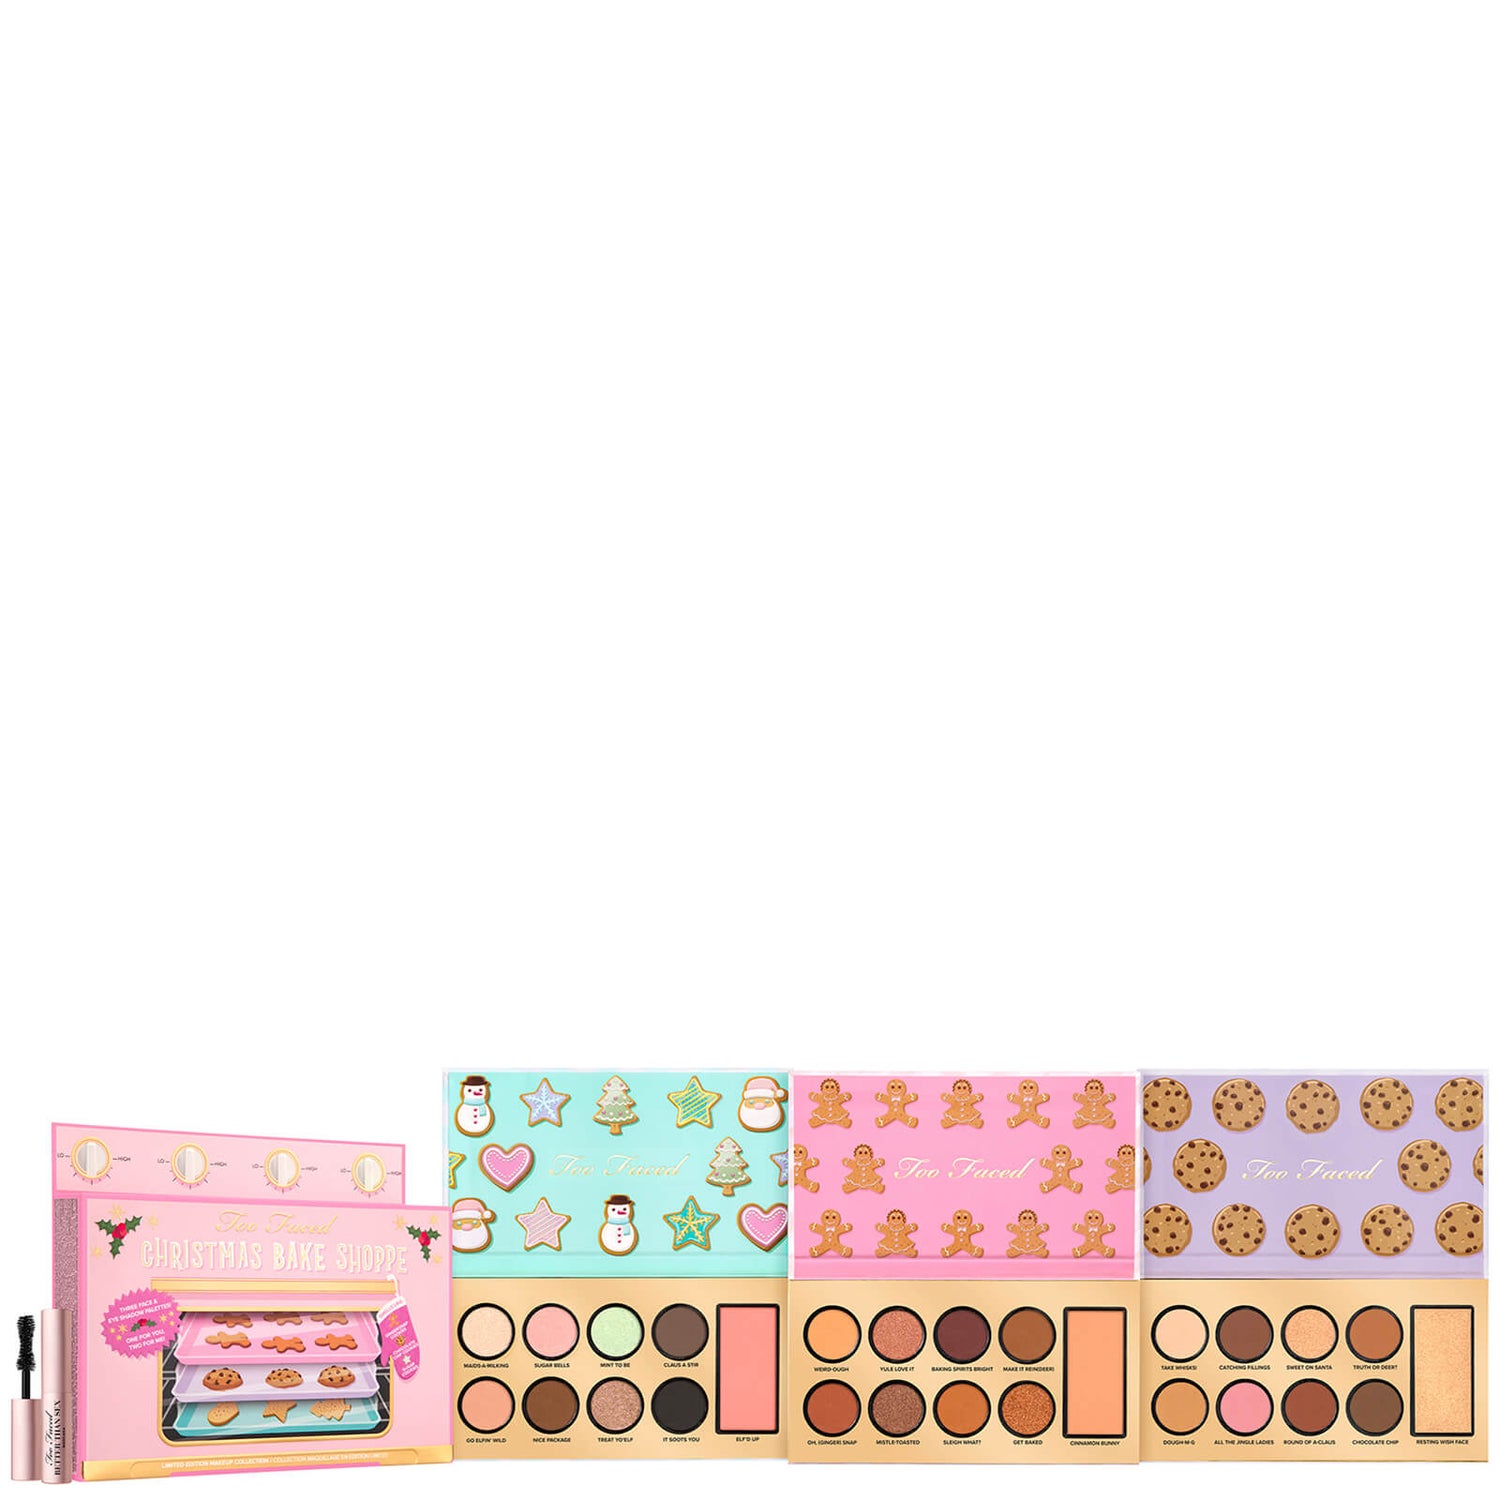 Too Faced Limited Edition Christmas Bake Shoppe Makeup Collection Set 